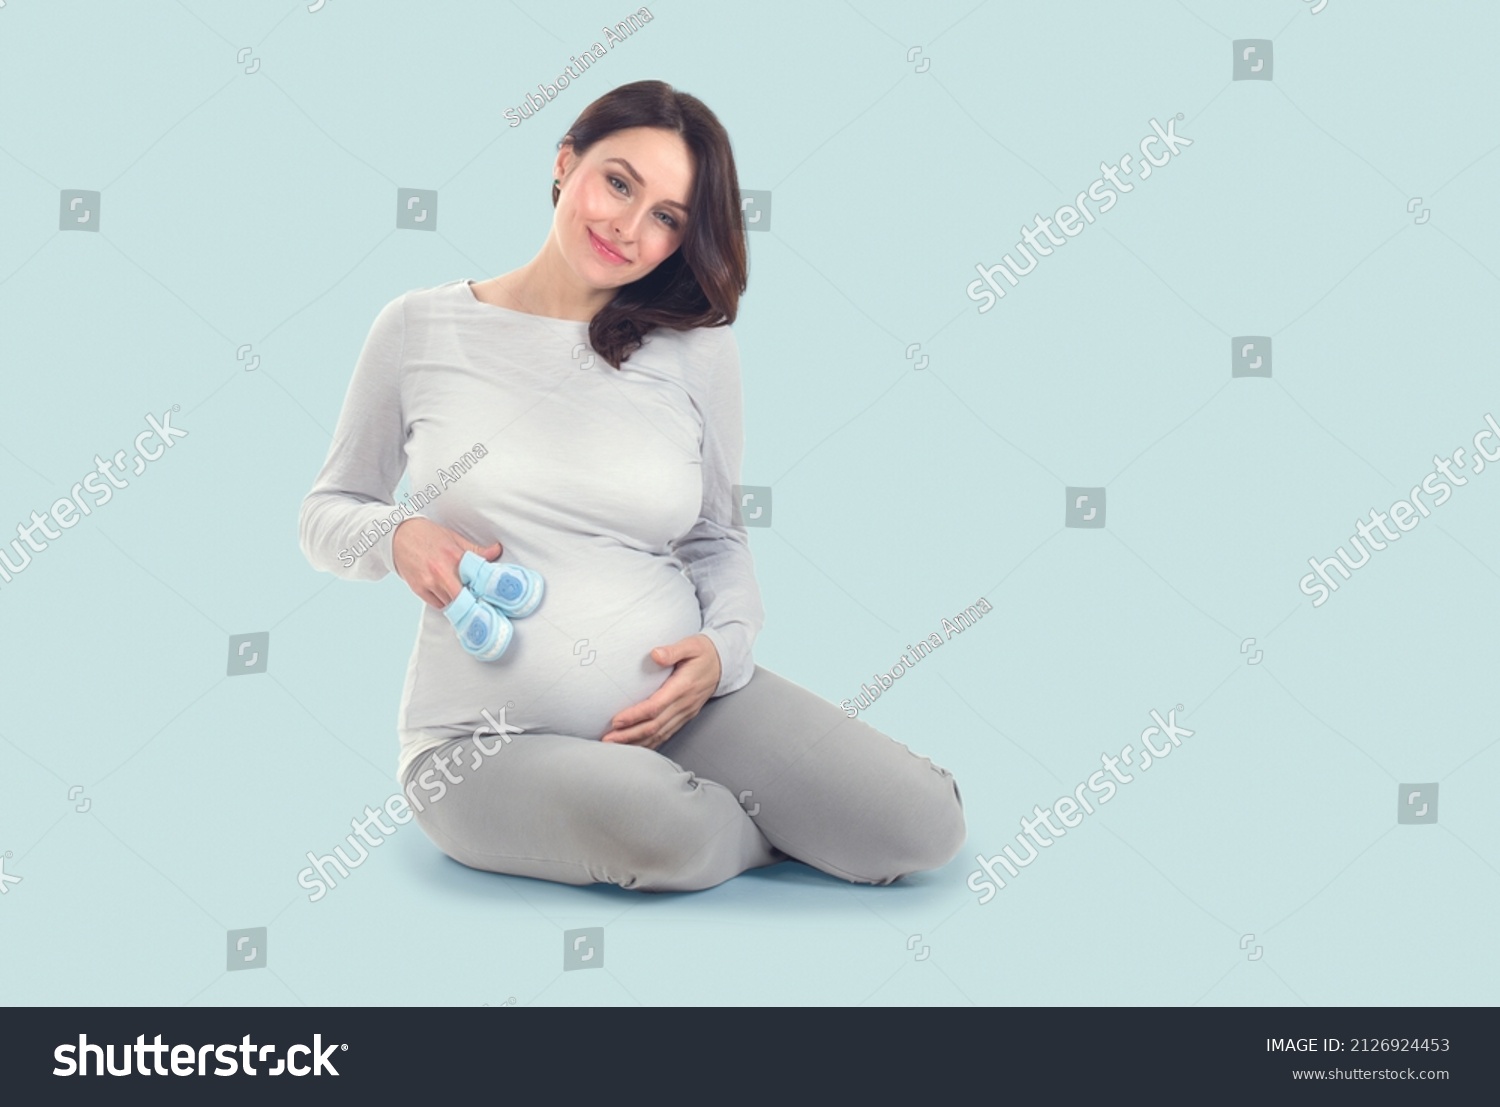 Pregnant Woman touching her belly. Pregnant middle aged mother's hands caressing her tummy. Healthy Pregnancy concept, Sitting Gravid female on blue background, full length portrait #2126924453